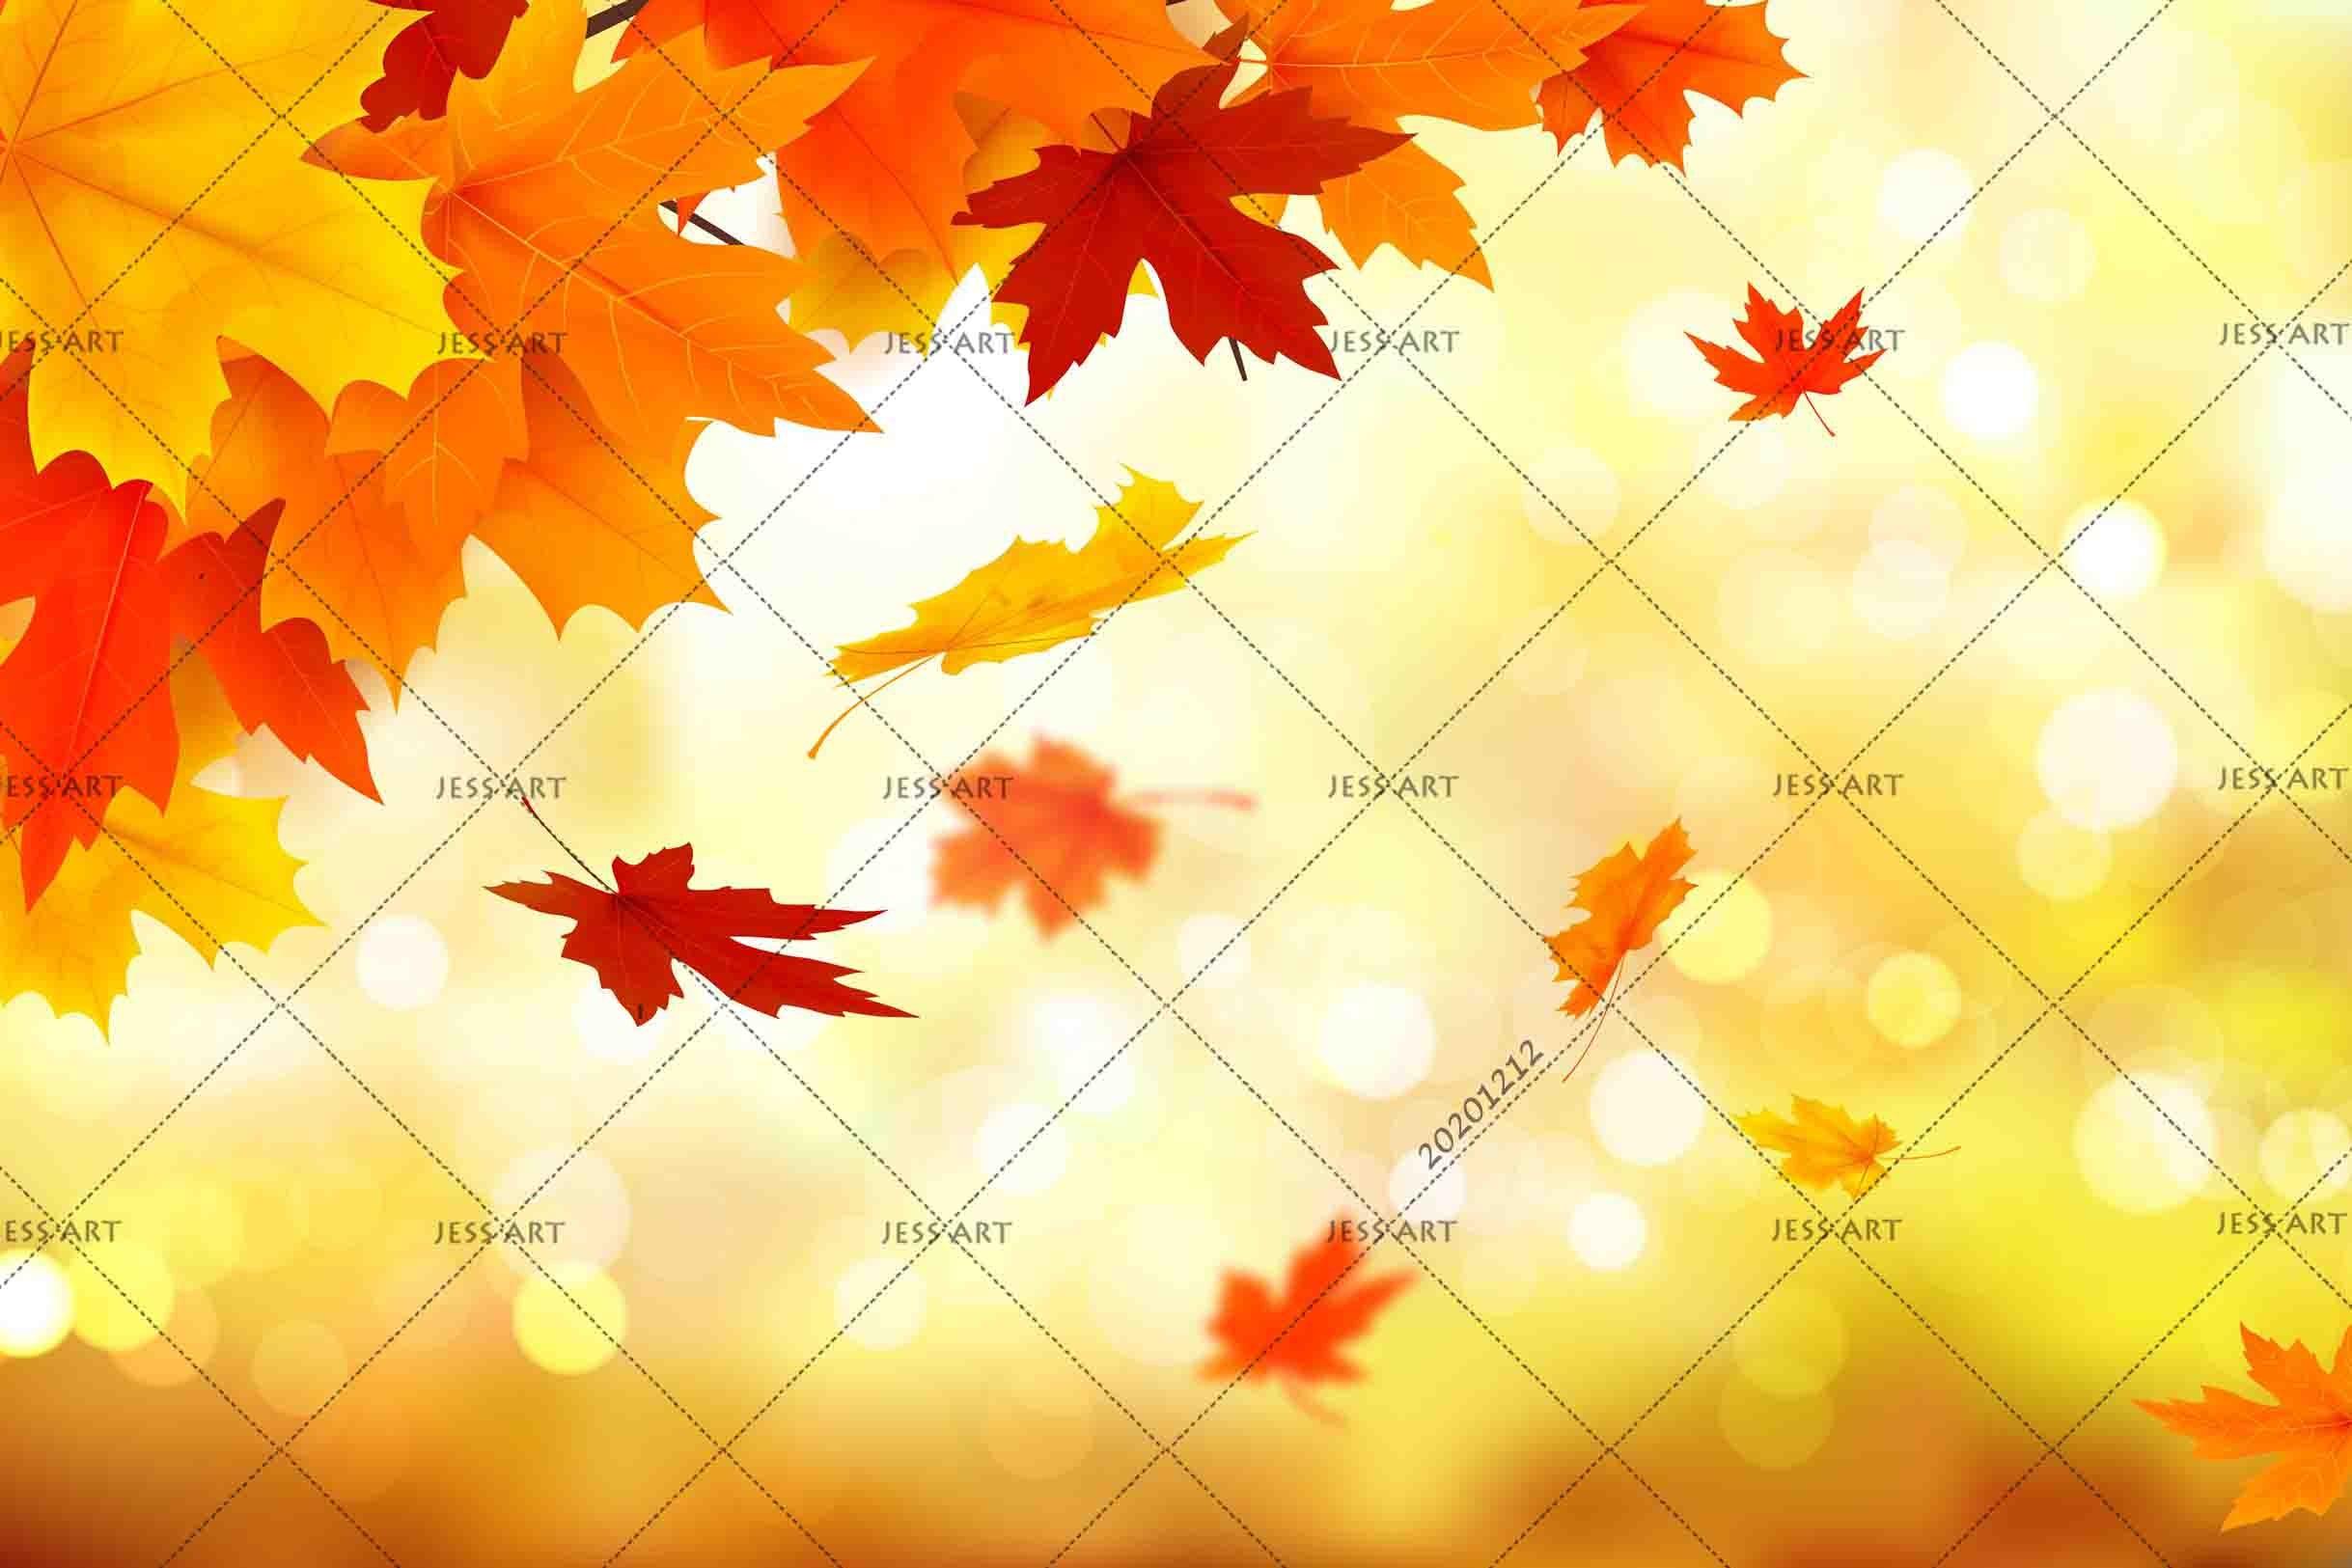 3D Embossed Autumn Maple Leaves Plant Background Wall Mural Wallpaper LXL- Jess Art Decoration